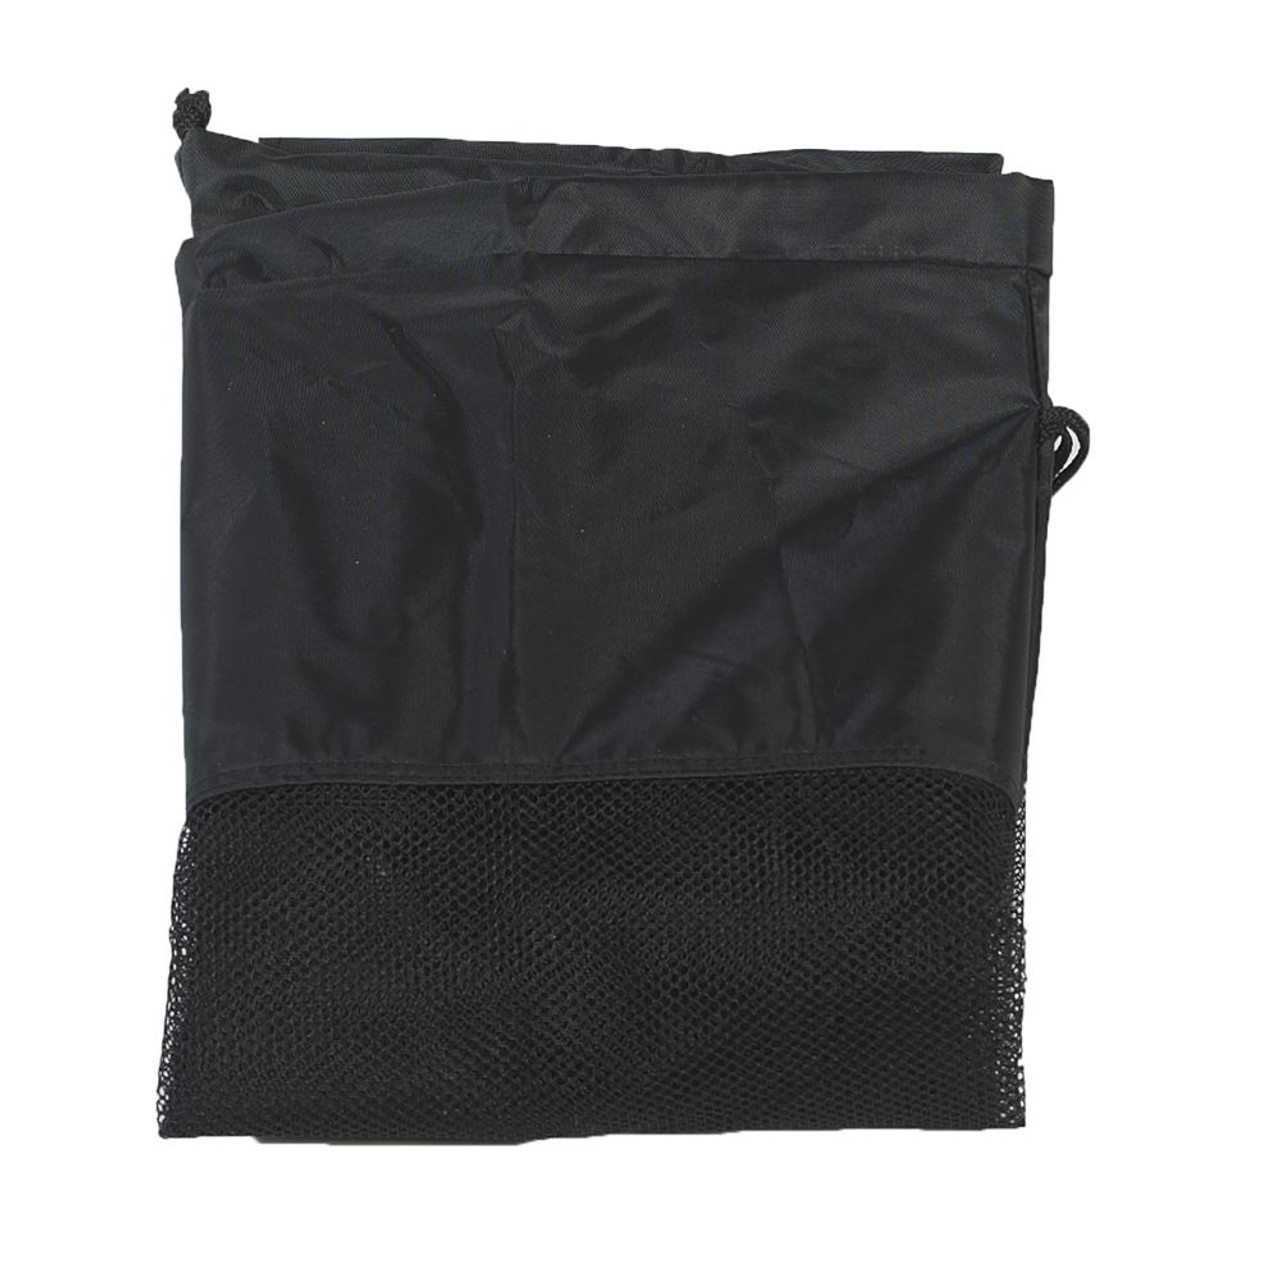 Replacement Storage Bag for 4-Rings Basketball Stand - bag only